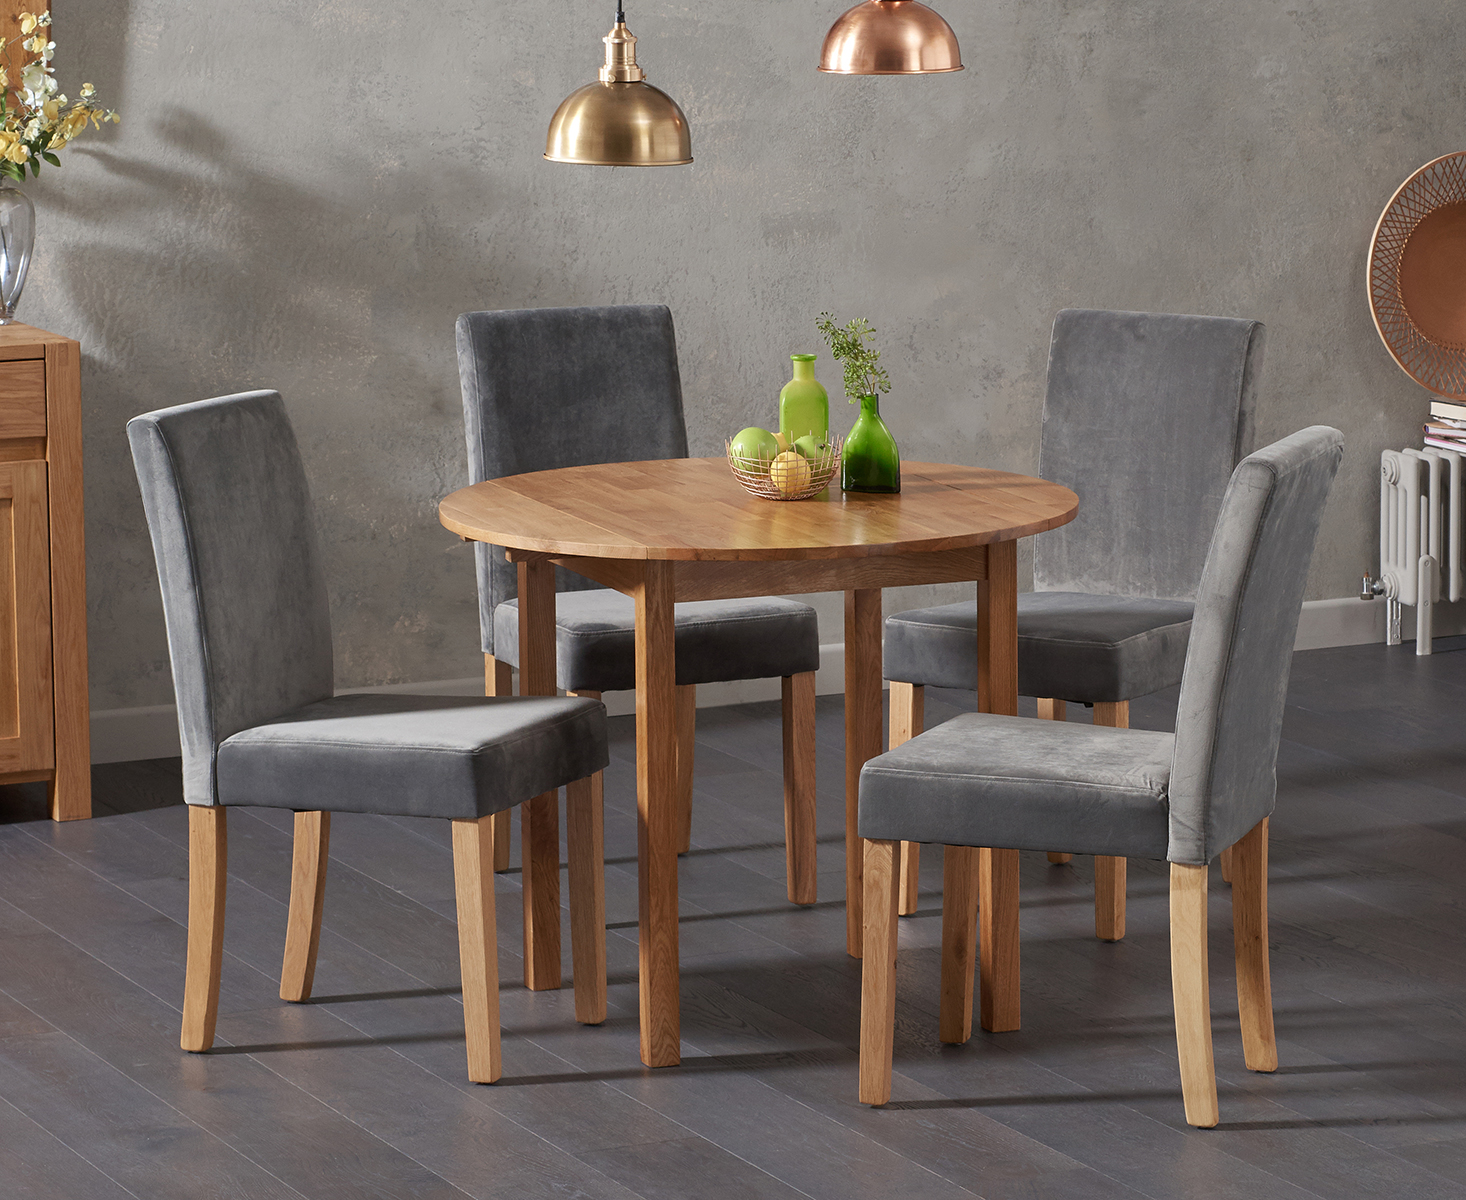 Oxford 90cm Solid Oak Drop Leaf Extending Dining Table With 4 Grey Lila Plush Chairs